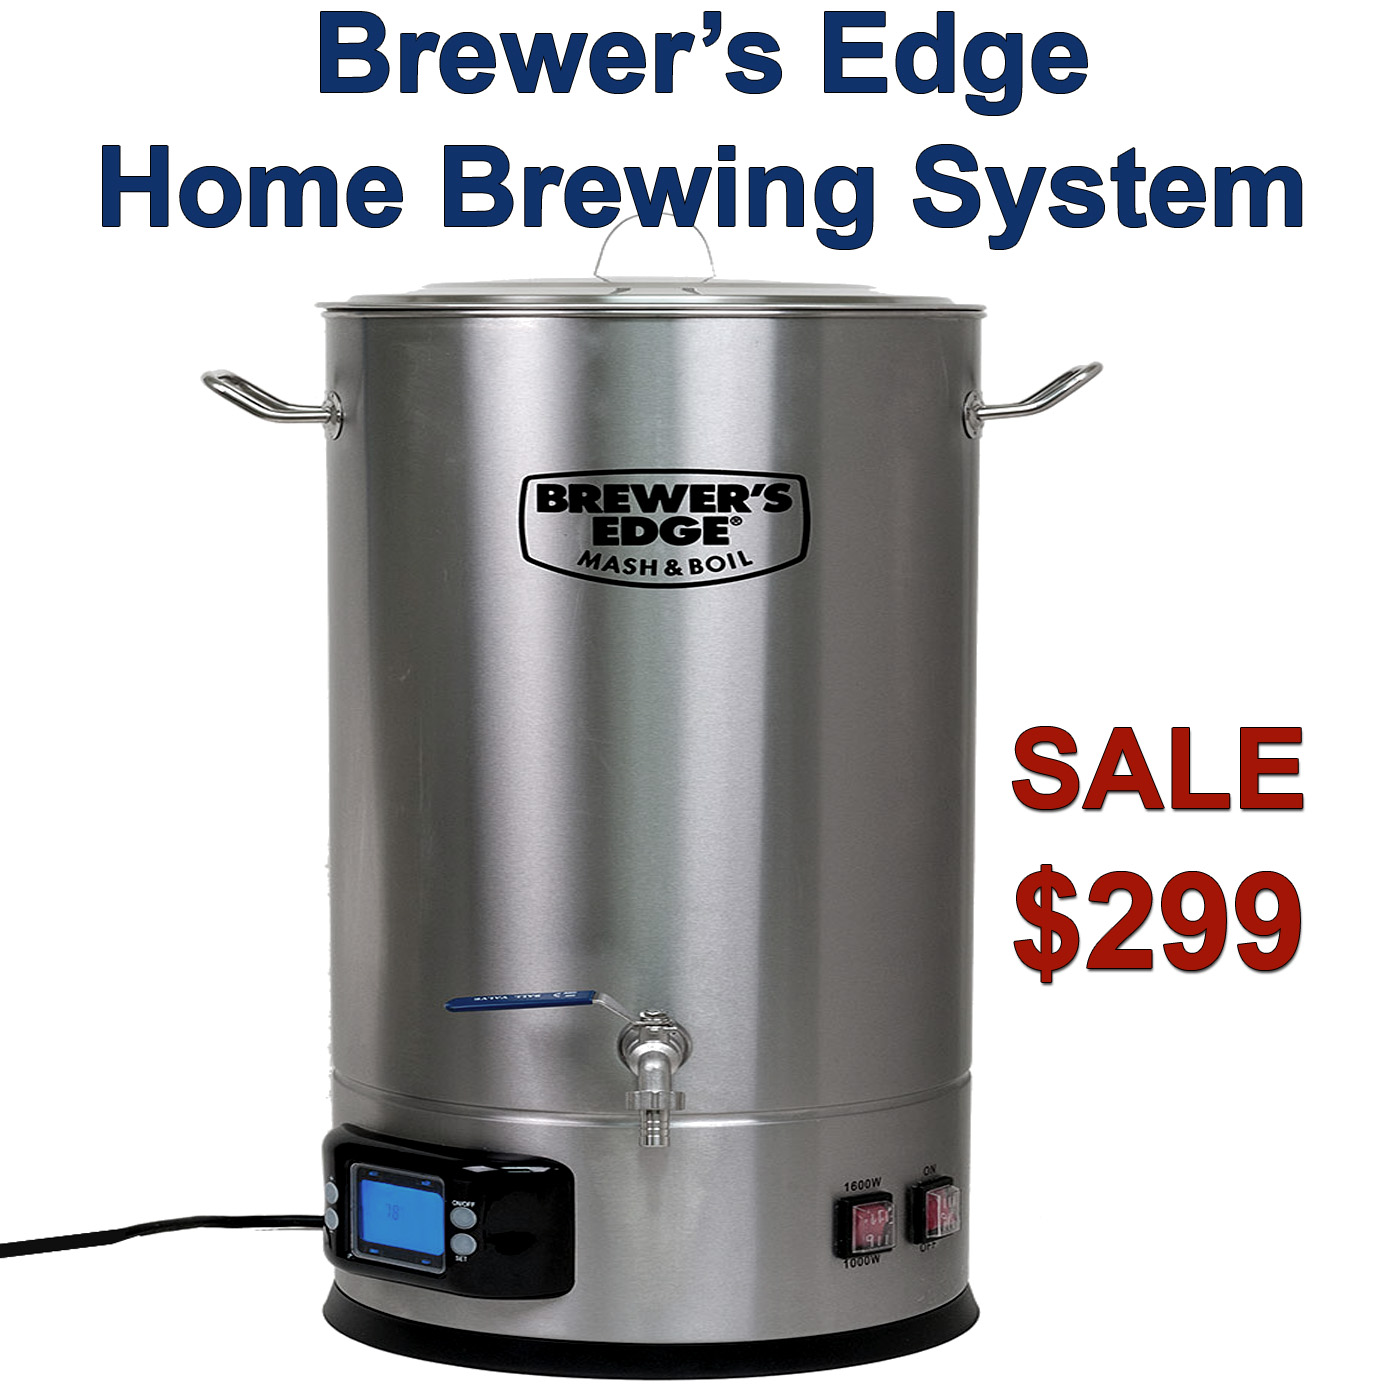 Brewers Edge Homebrewing System